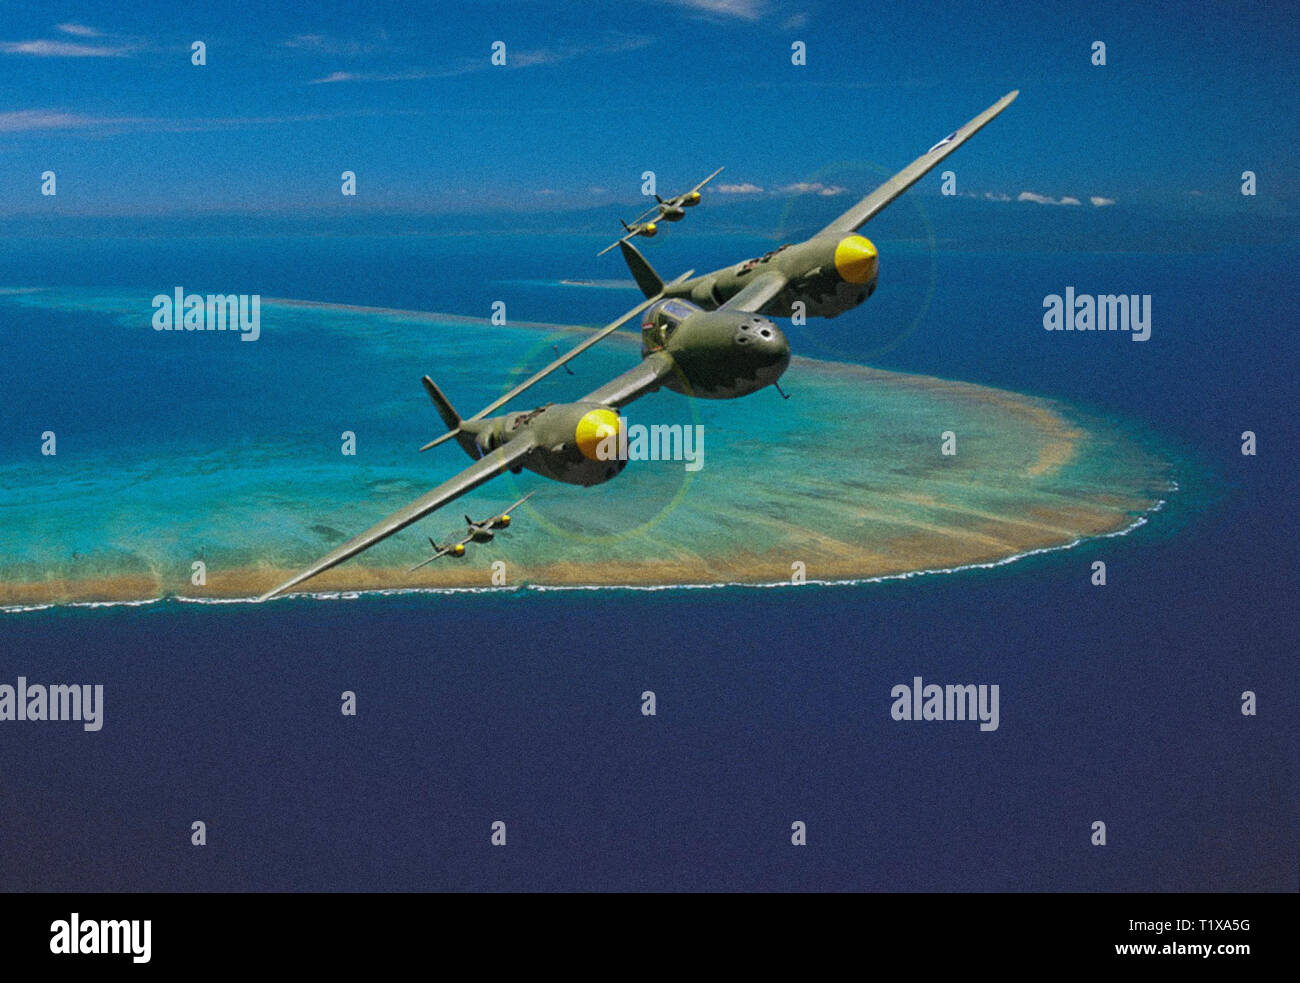 A digital air-to-air scenario of three twin engine P38 Lockheed Lightning fighters over a Pacific atoll during WWII. Plastic model and Photoshop comp. Stock Photo